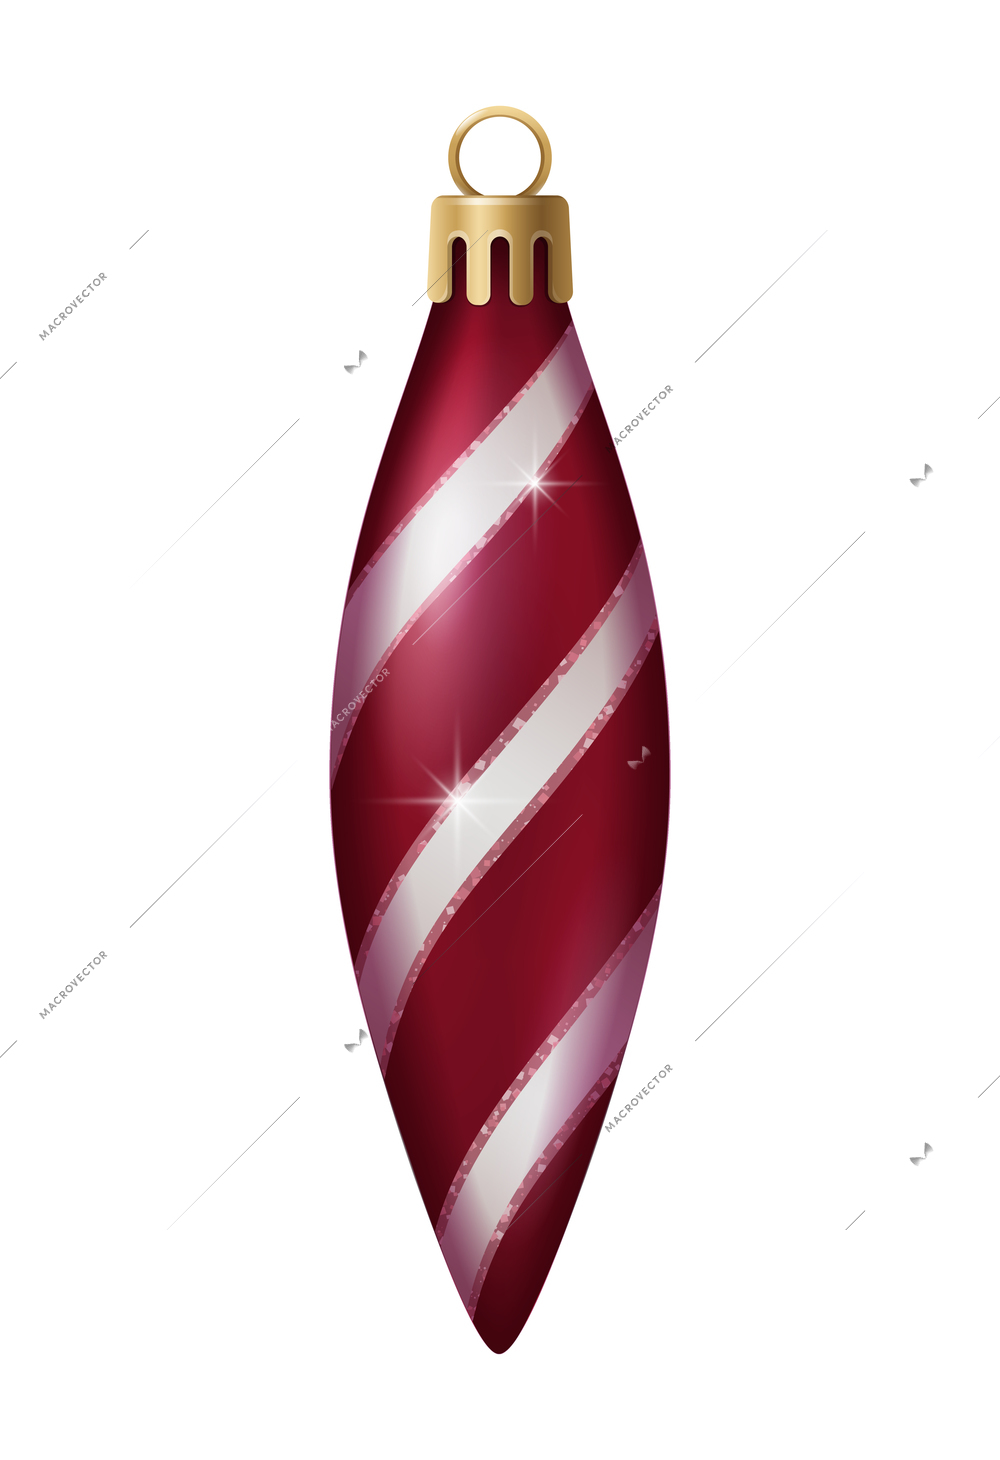 Realistic christmas tree toy composition with icicle shaped christmas ornament with stripes vector illustration